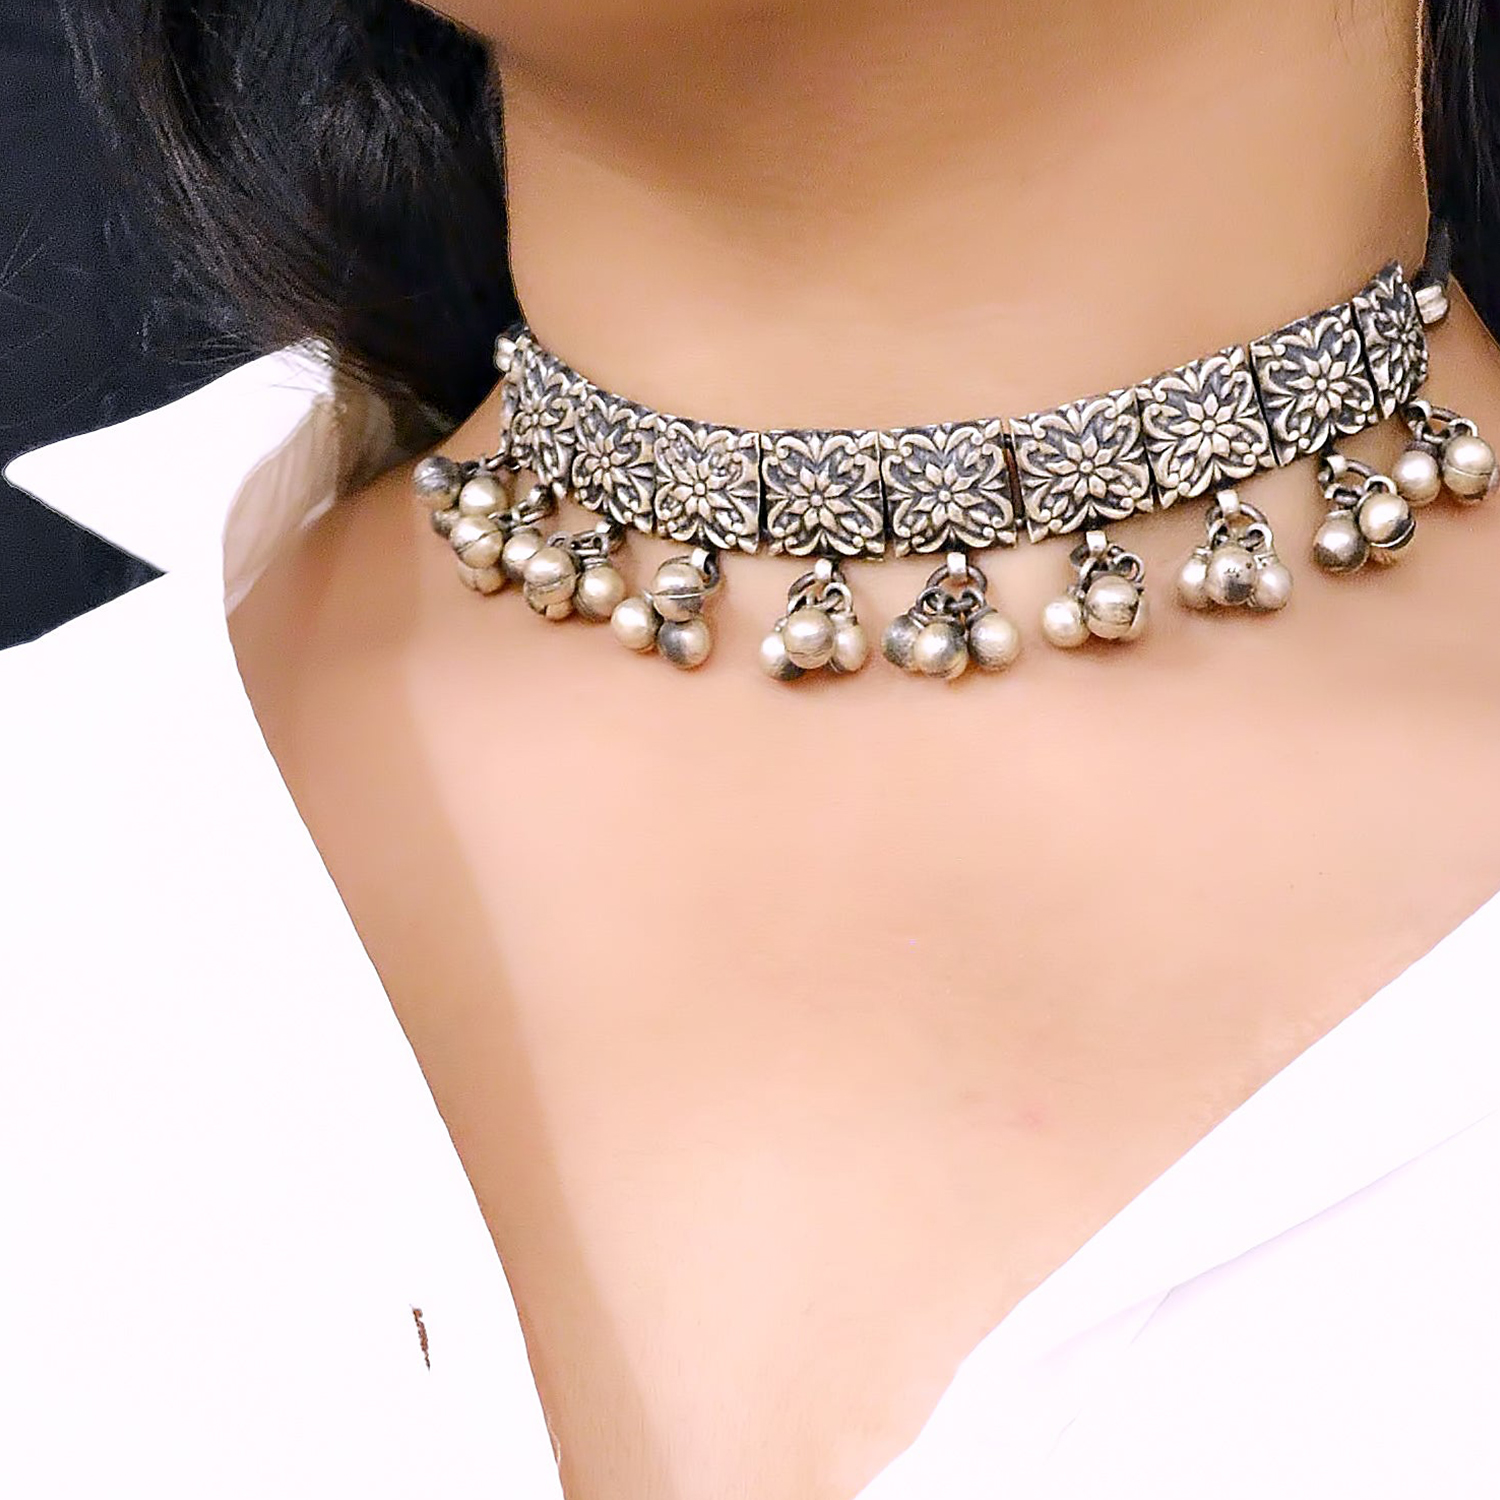 Handcrafted Beautiful Shaped Galabandh Flotal Choker | Square Silver Choker for Women - Necklaces FOLKWAYS